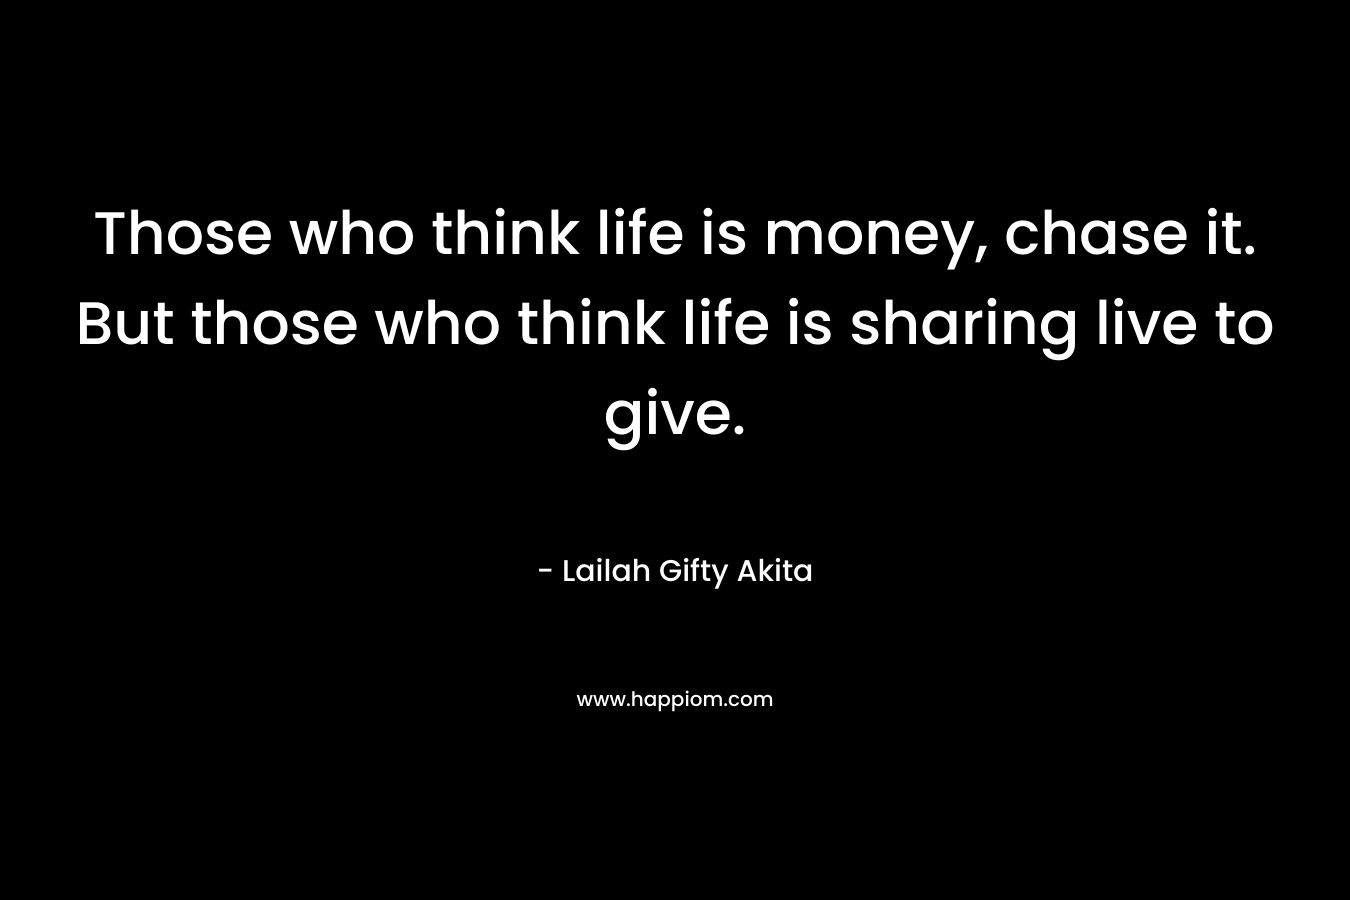 Those who think life is money, chase it. But those who think life is sharing live to give.